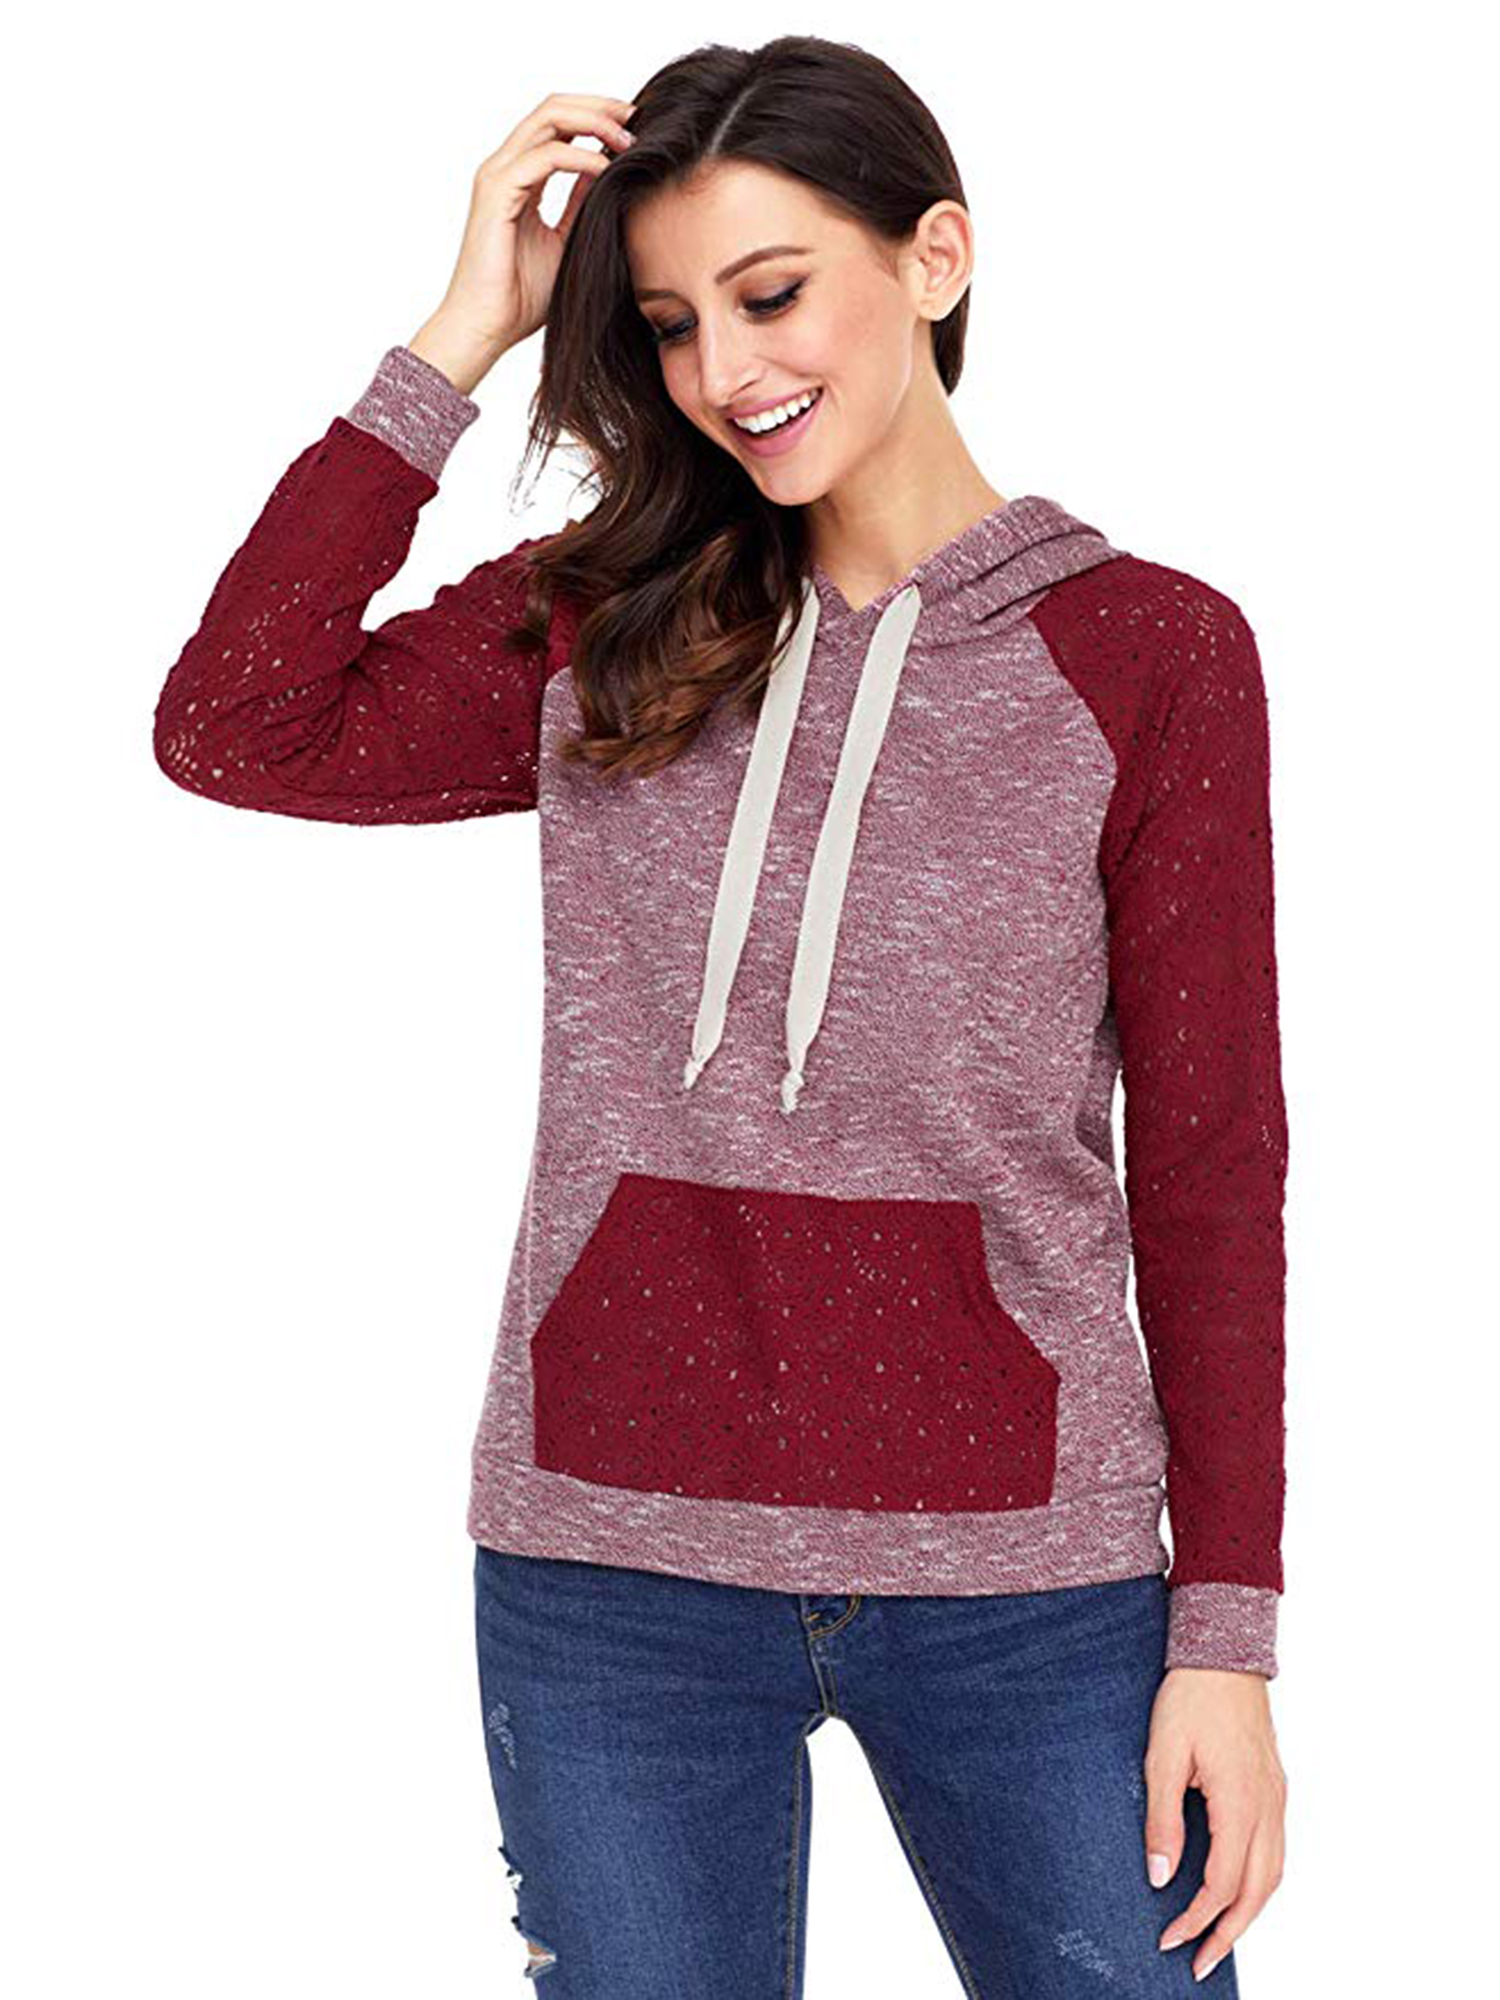 Topcobe - Clothes for Women on Clearance! Women&#39;s Pullover Hoodie for Women, Long Sleeve Print ...